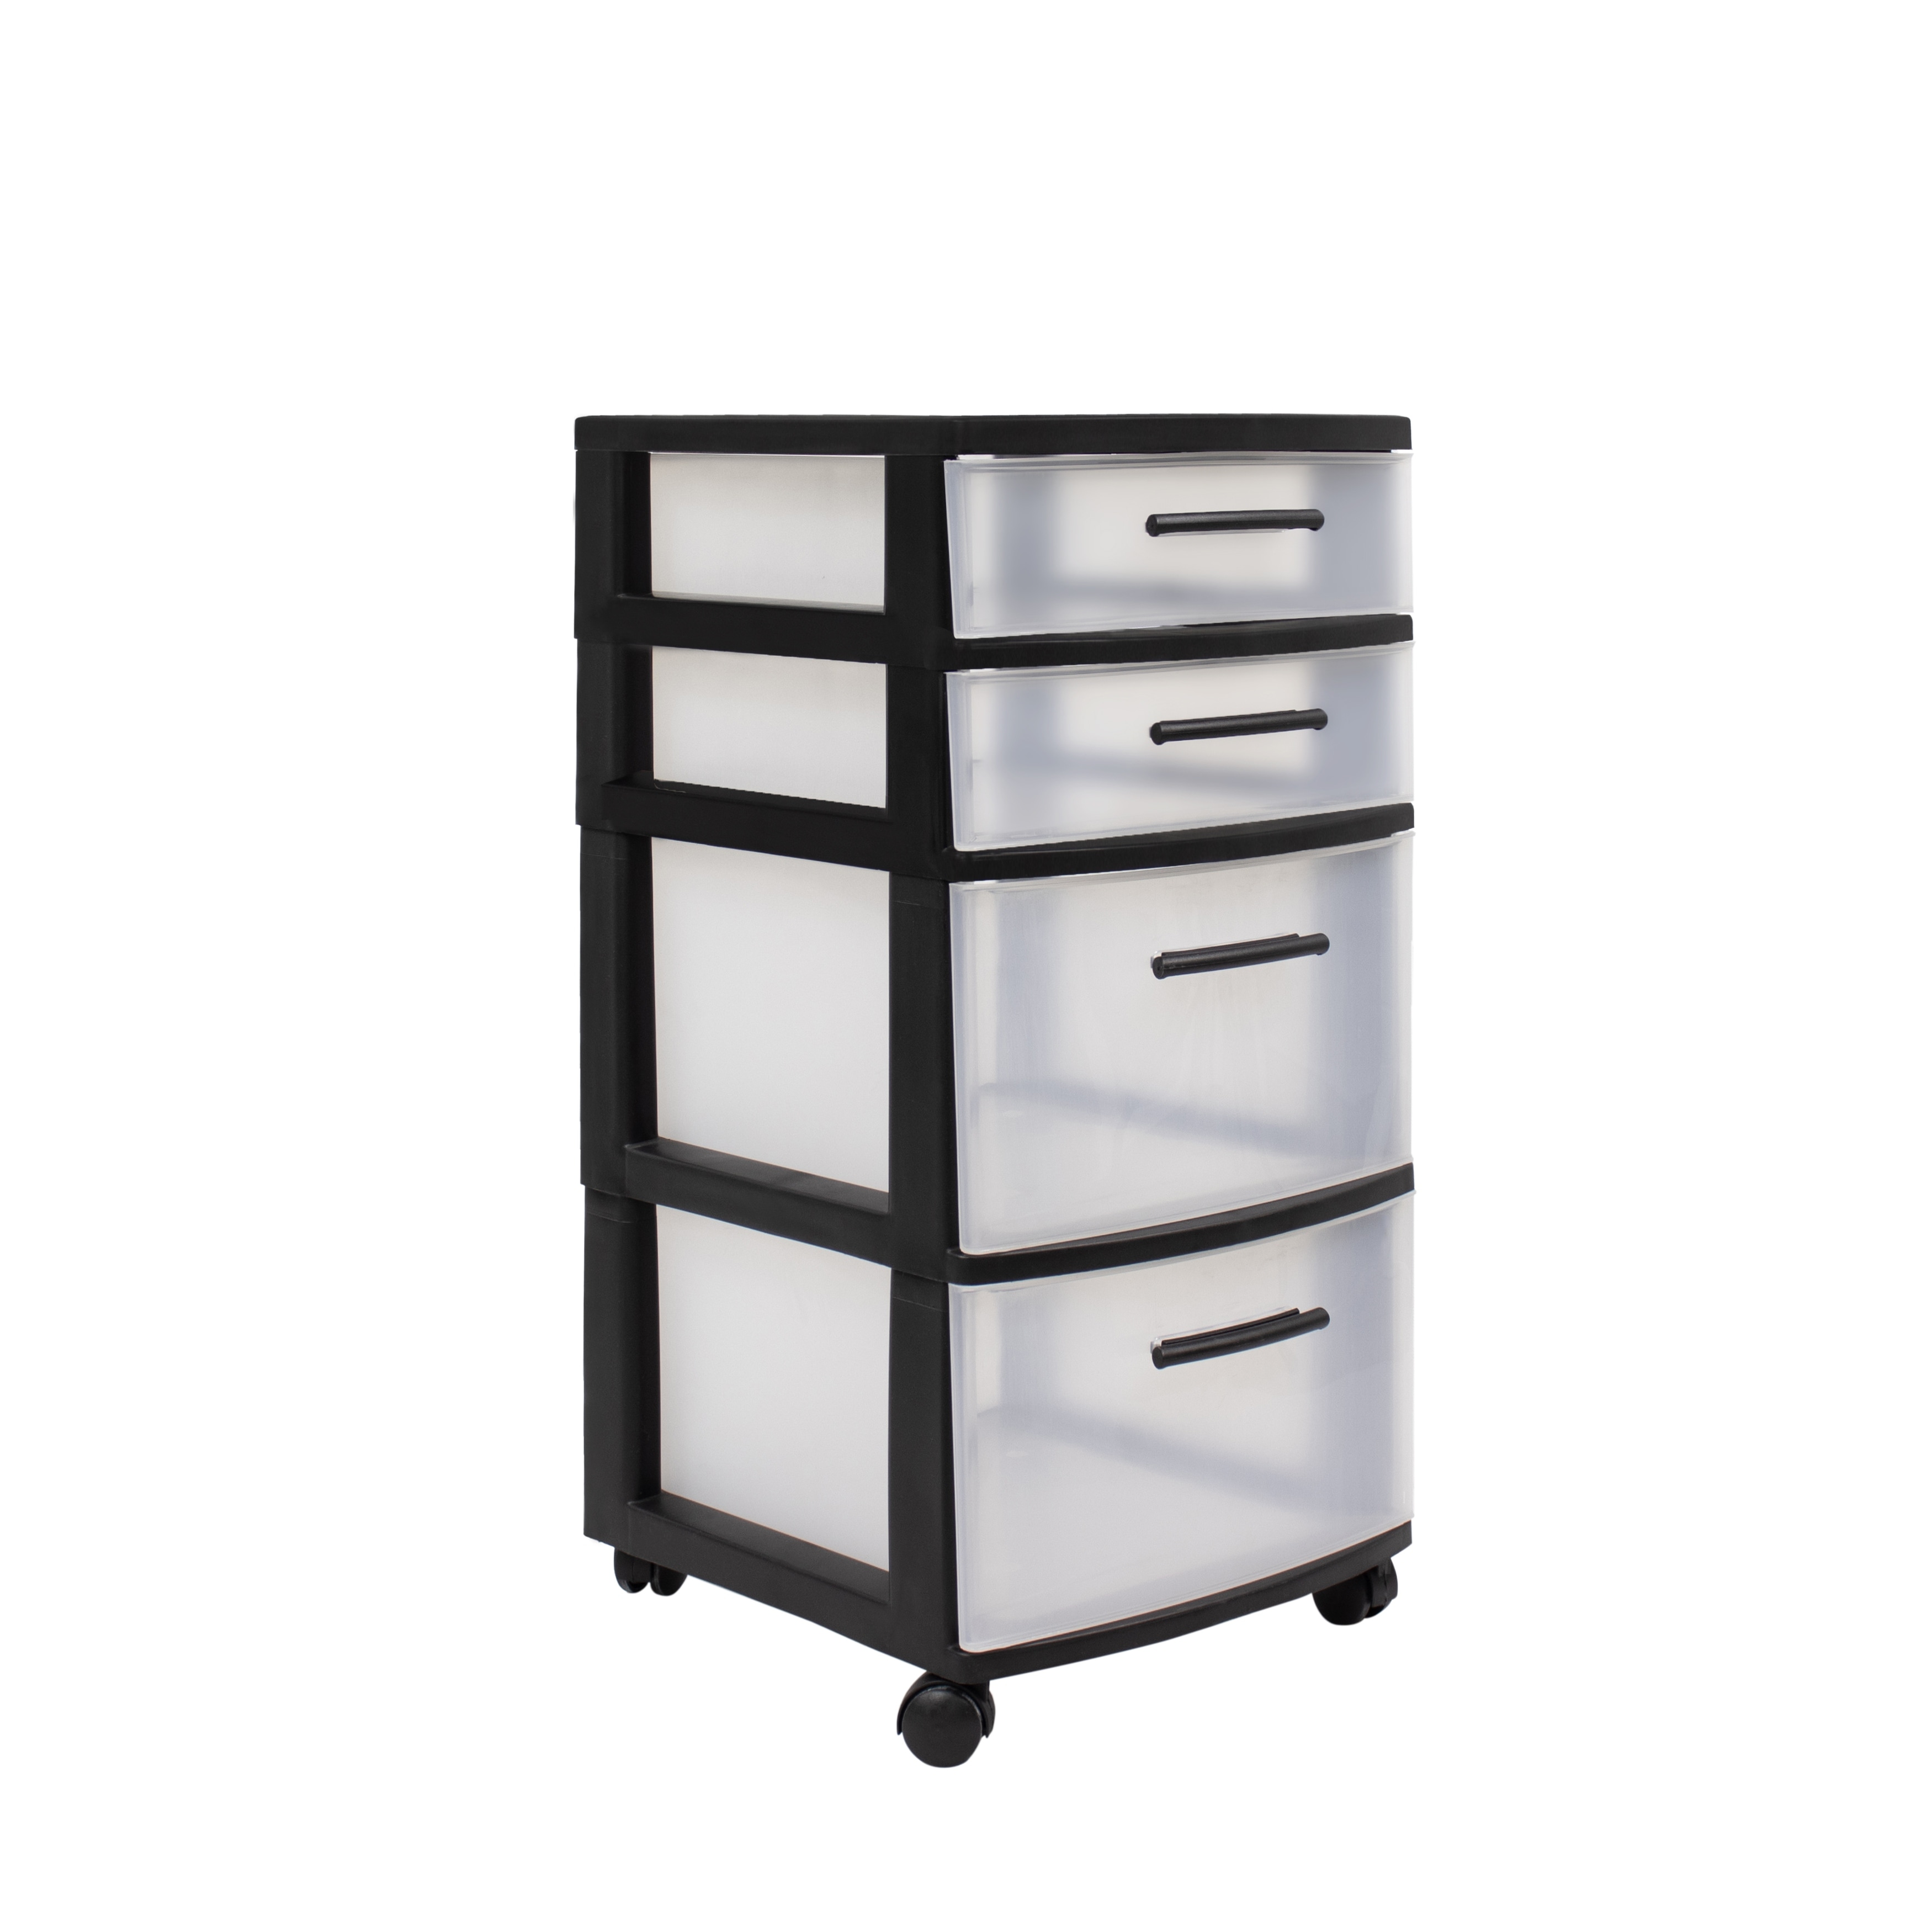 https://ak1.ostkcdn.com/images/products/is/images/direct/2fd30b9bf383fe88fdd8939b56e34e3d0cd0a1e6/MQ-Eclypse-4-Drawer-Rolling-Storage-Cart.jpg